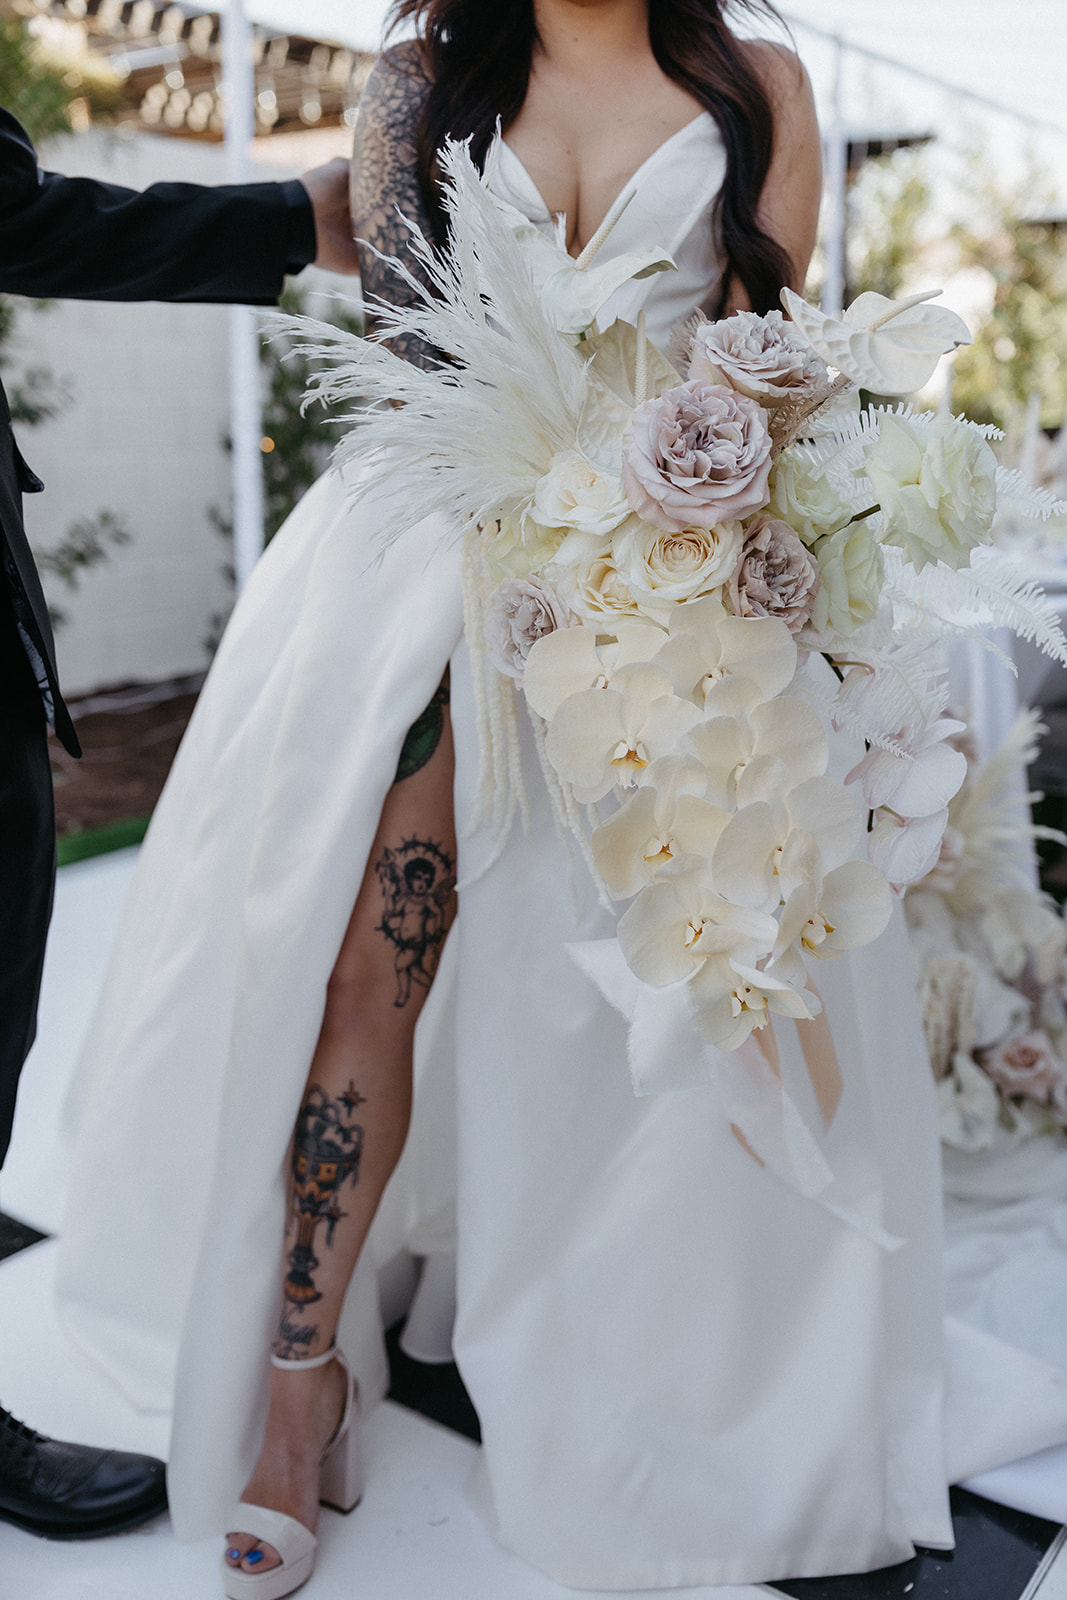 Bride in White Dress with Slit and Block Heels Standing with Monochromatic Modern Bouquet with White Orchids 